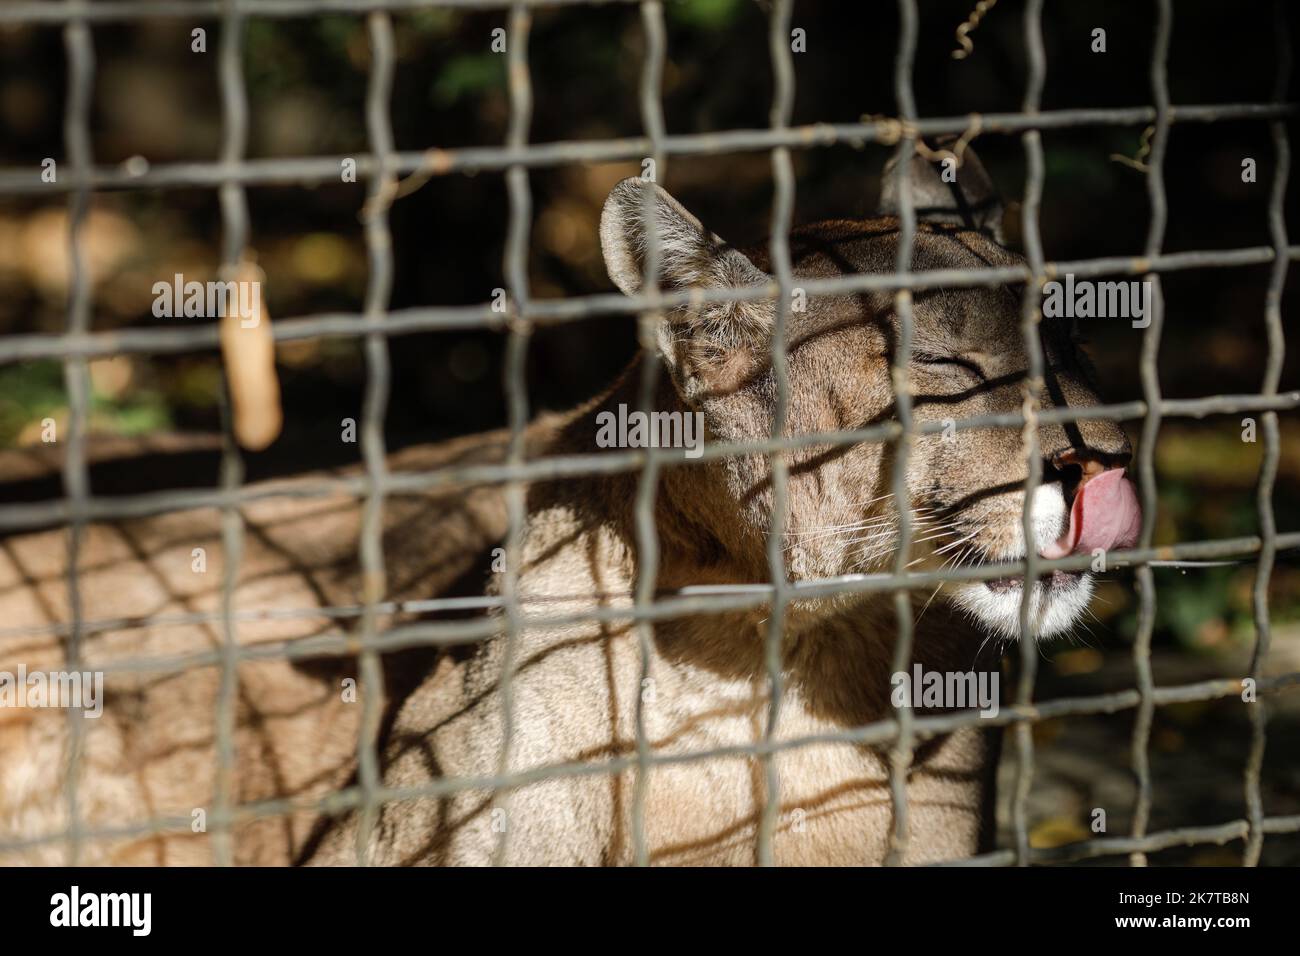 Caged cougar in an eastern European zoo. Caged wildlife. Animal abuse. Stock Photo